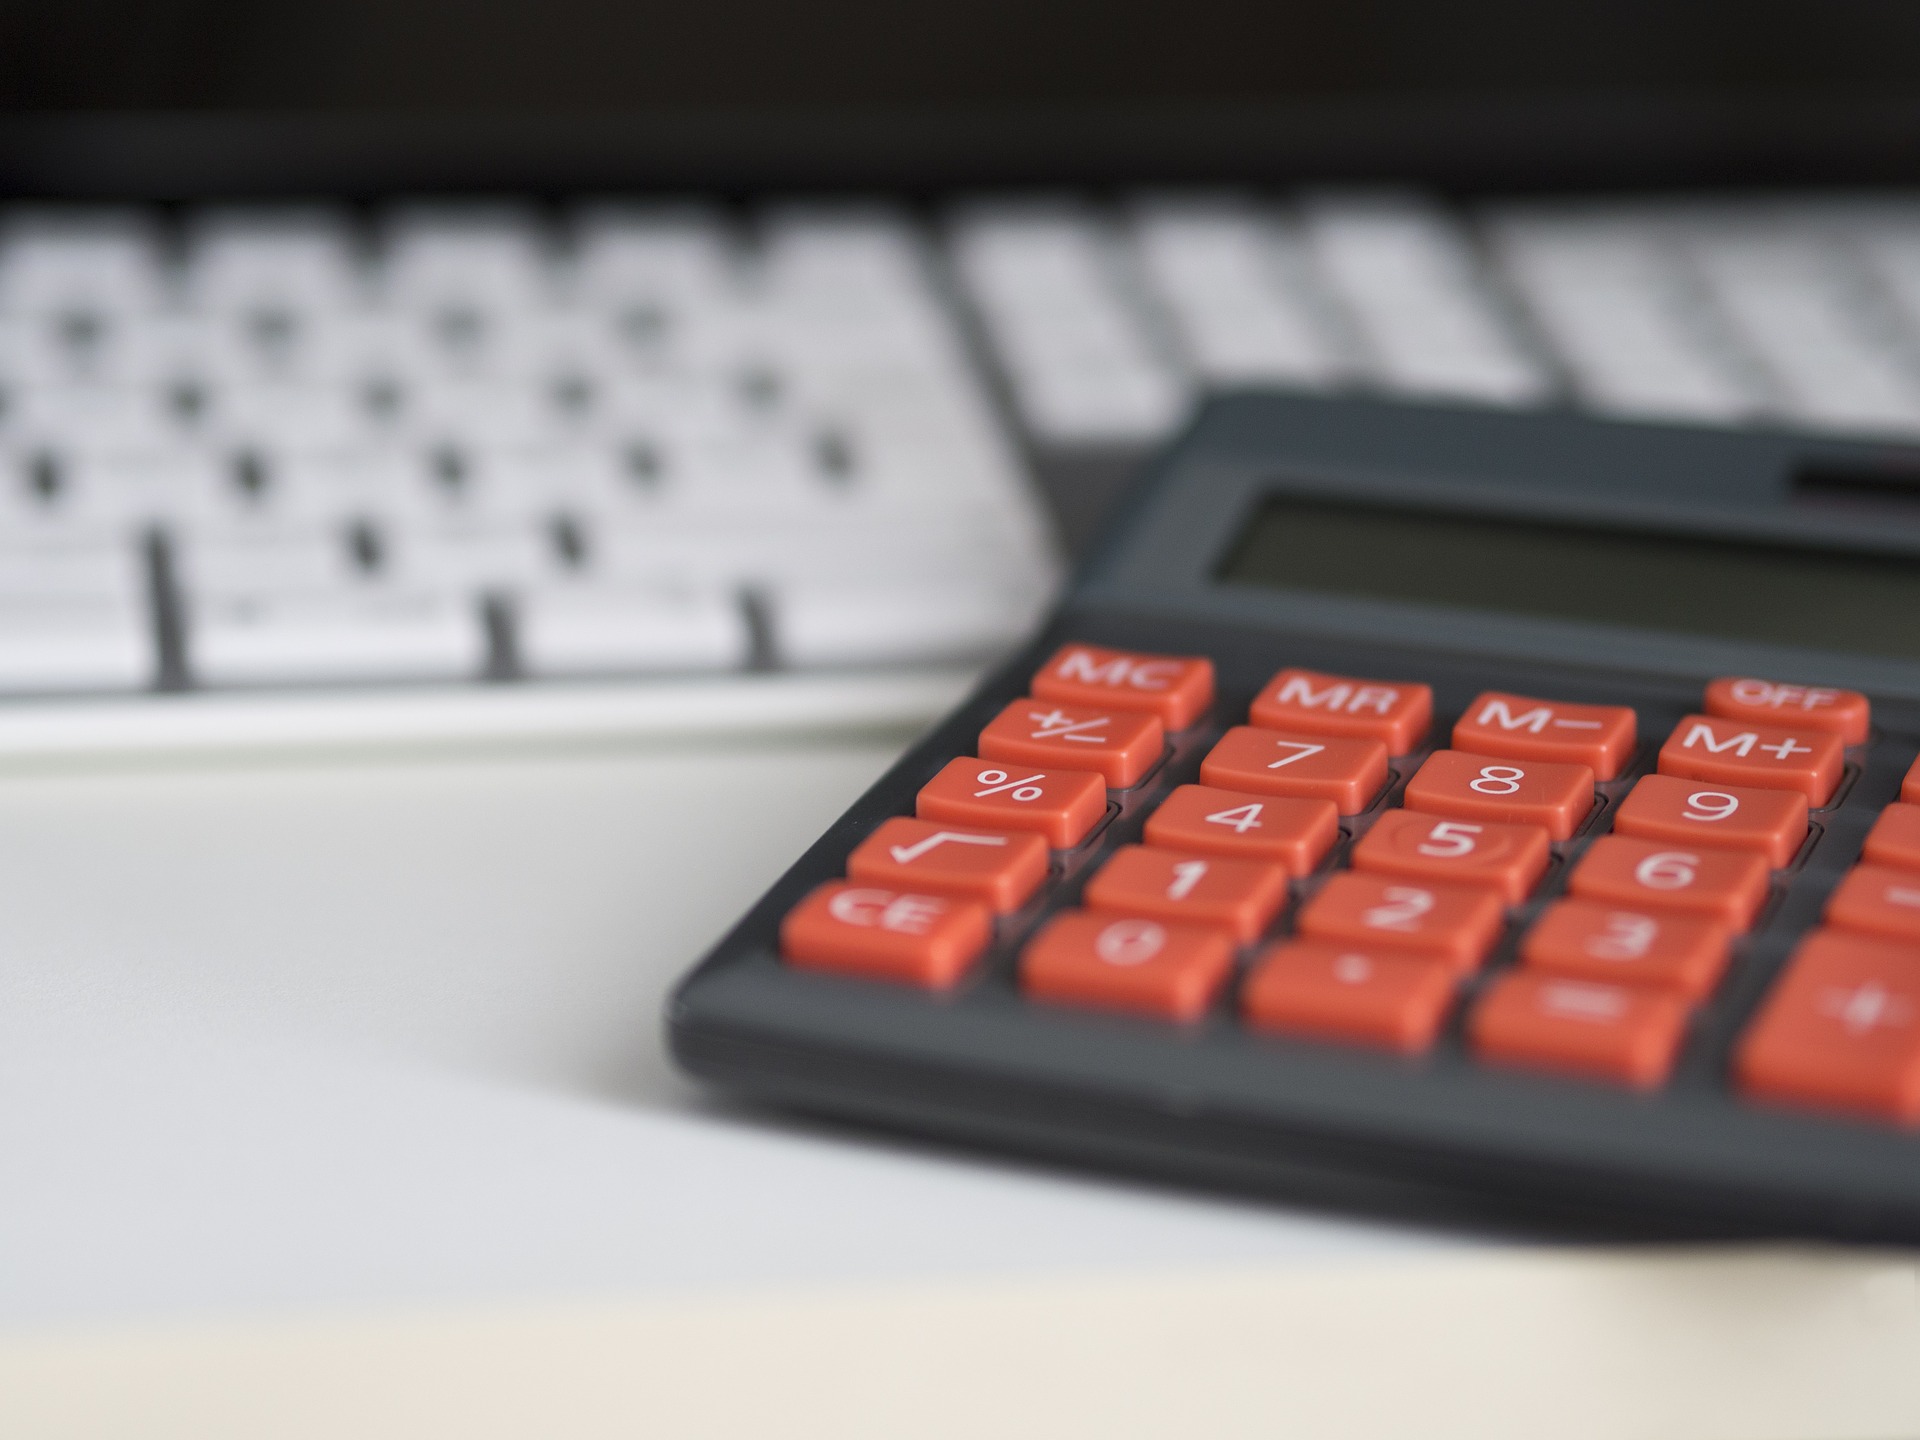 Employee Turnover: Calculating and Understanding the Costs